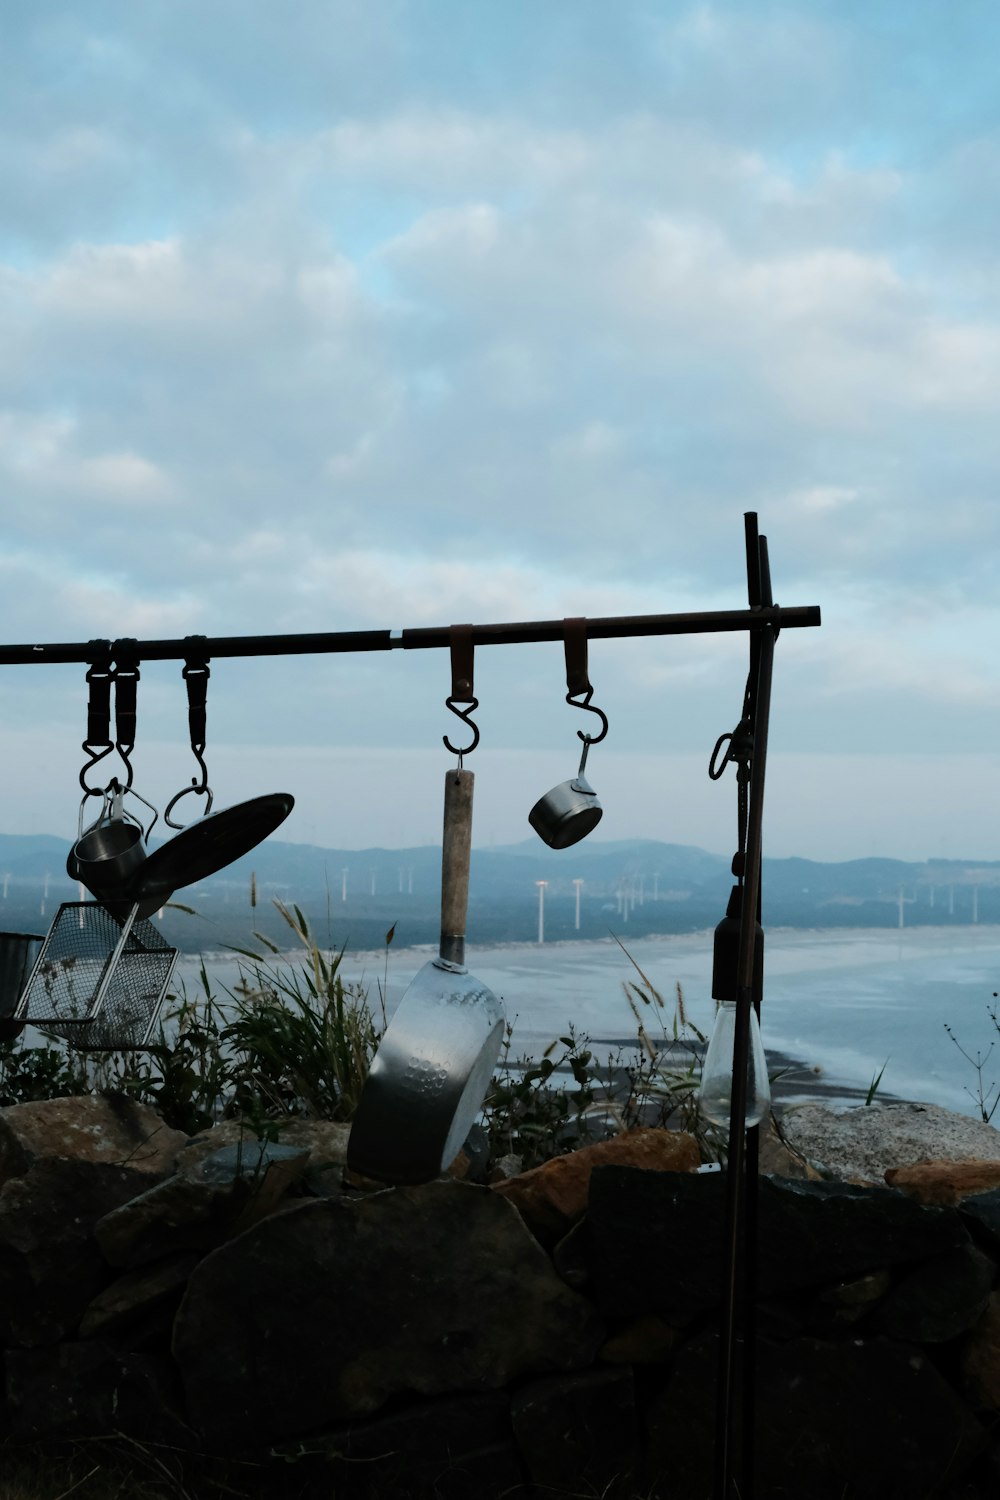 a group of bells on a pole by a body of water